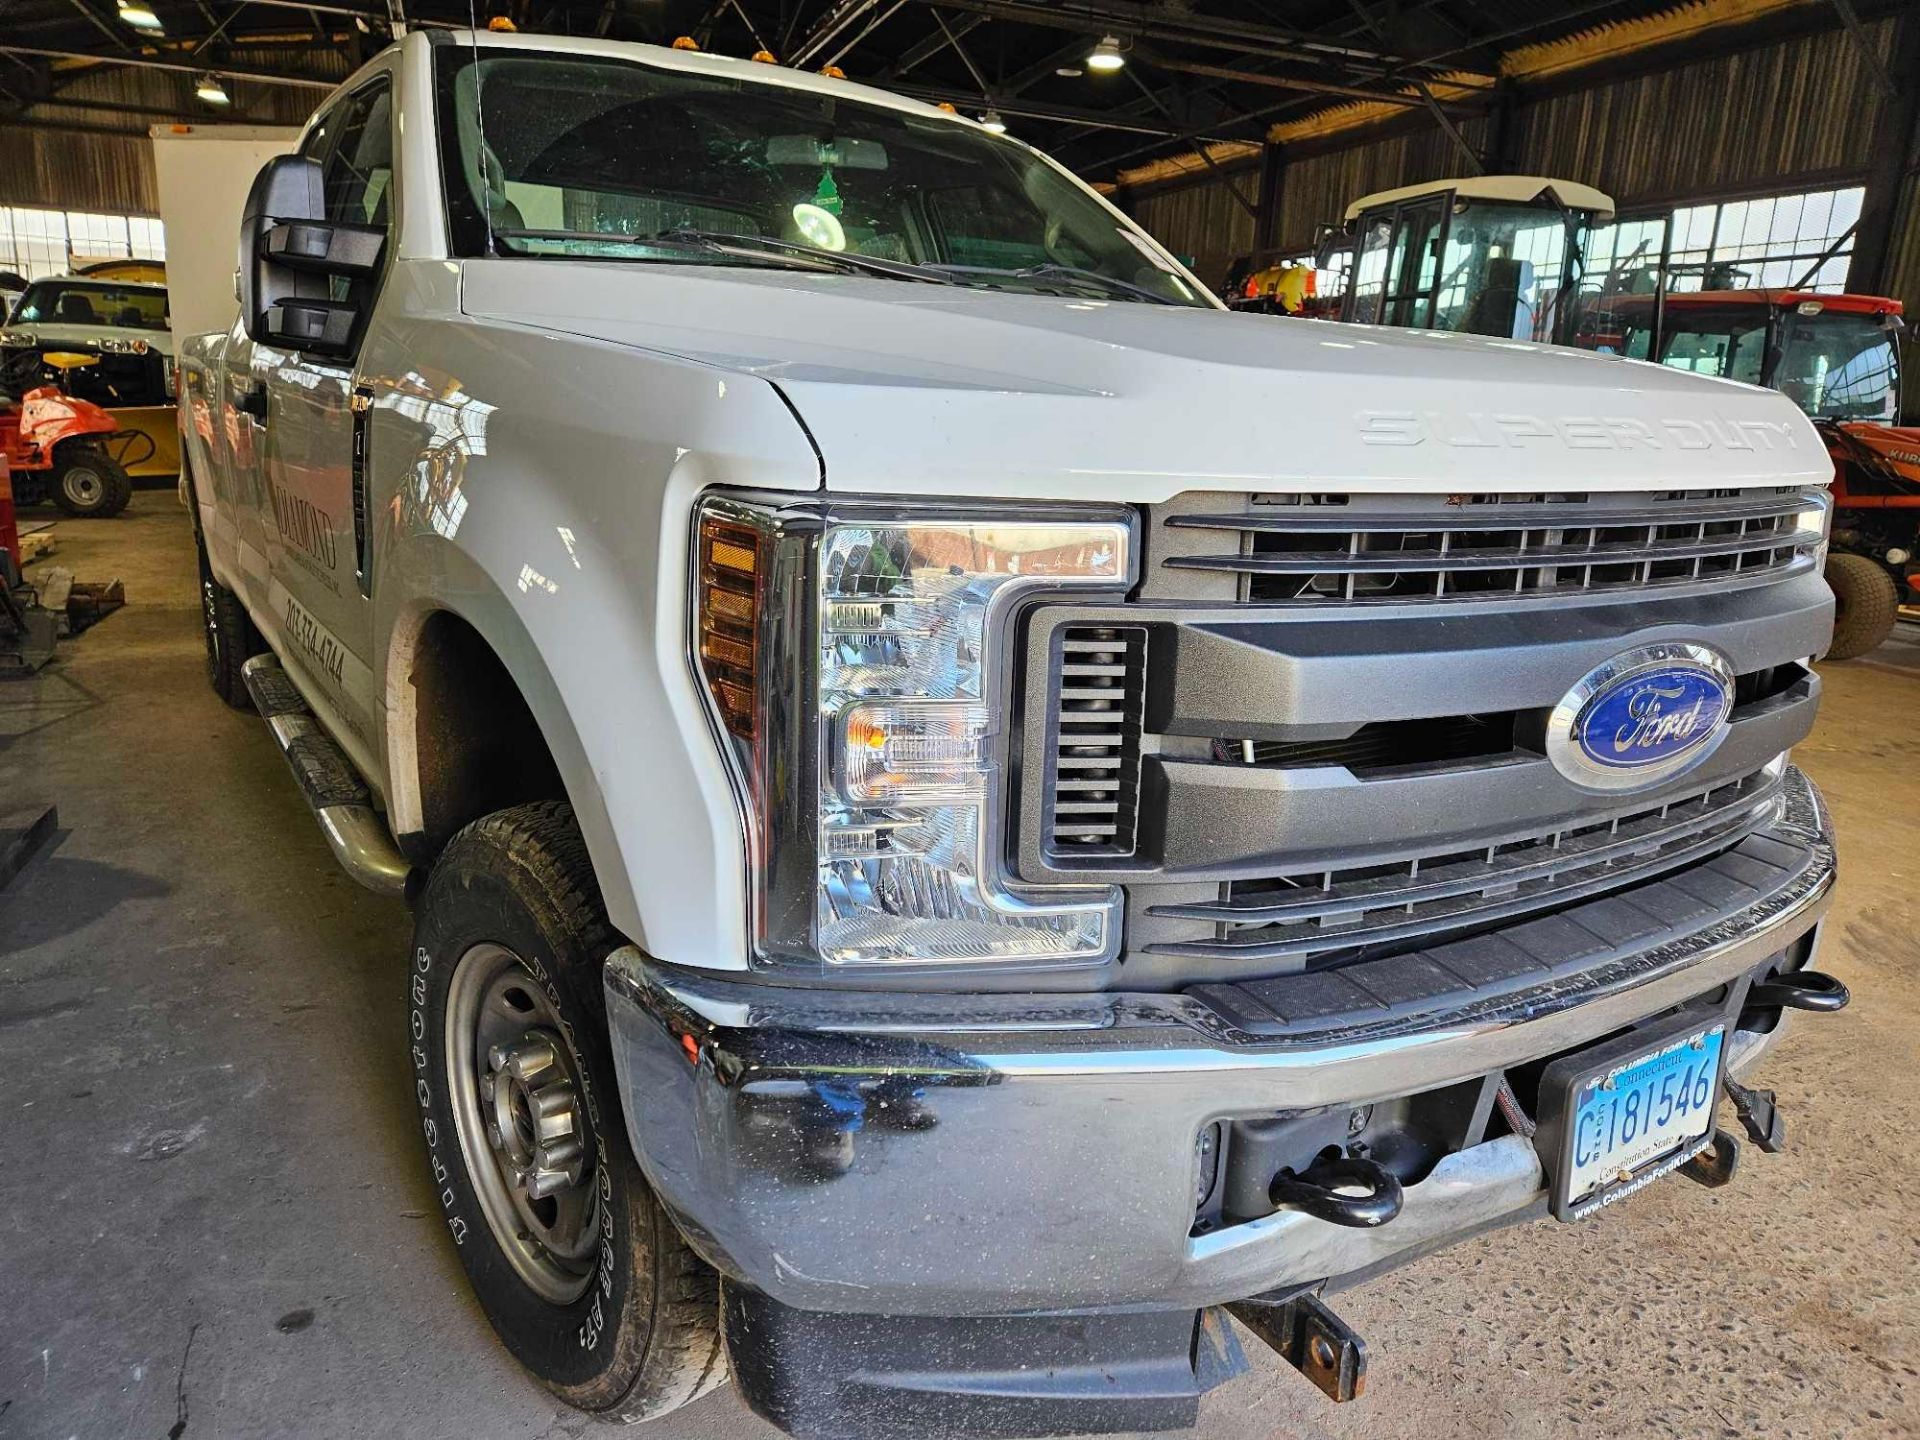 2019 Ford F250 XL Super Duty Truck - Image 2 of 5